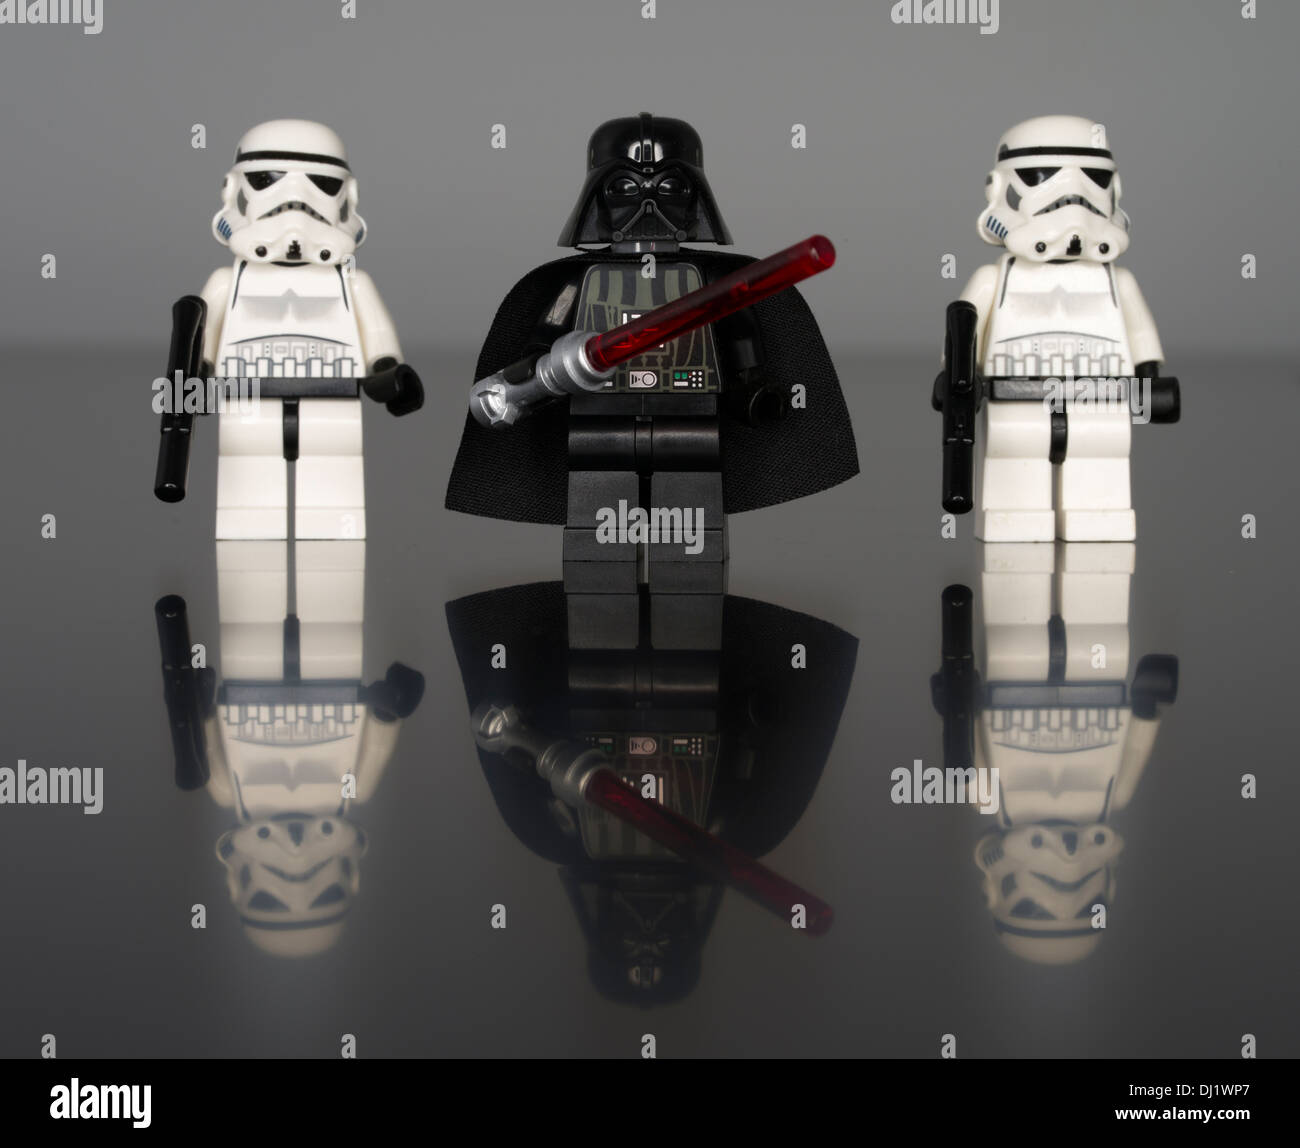 Lego Star Wars Minifigure Darth Vader  / Storm Troopers Stock Photo